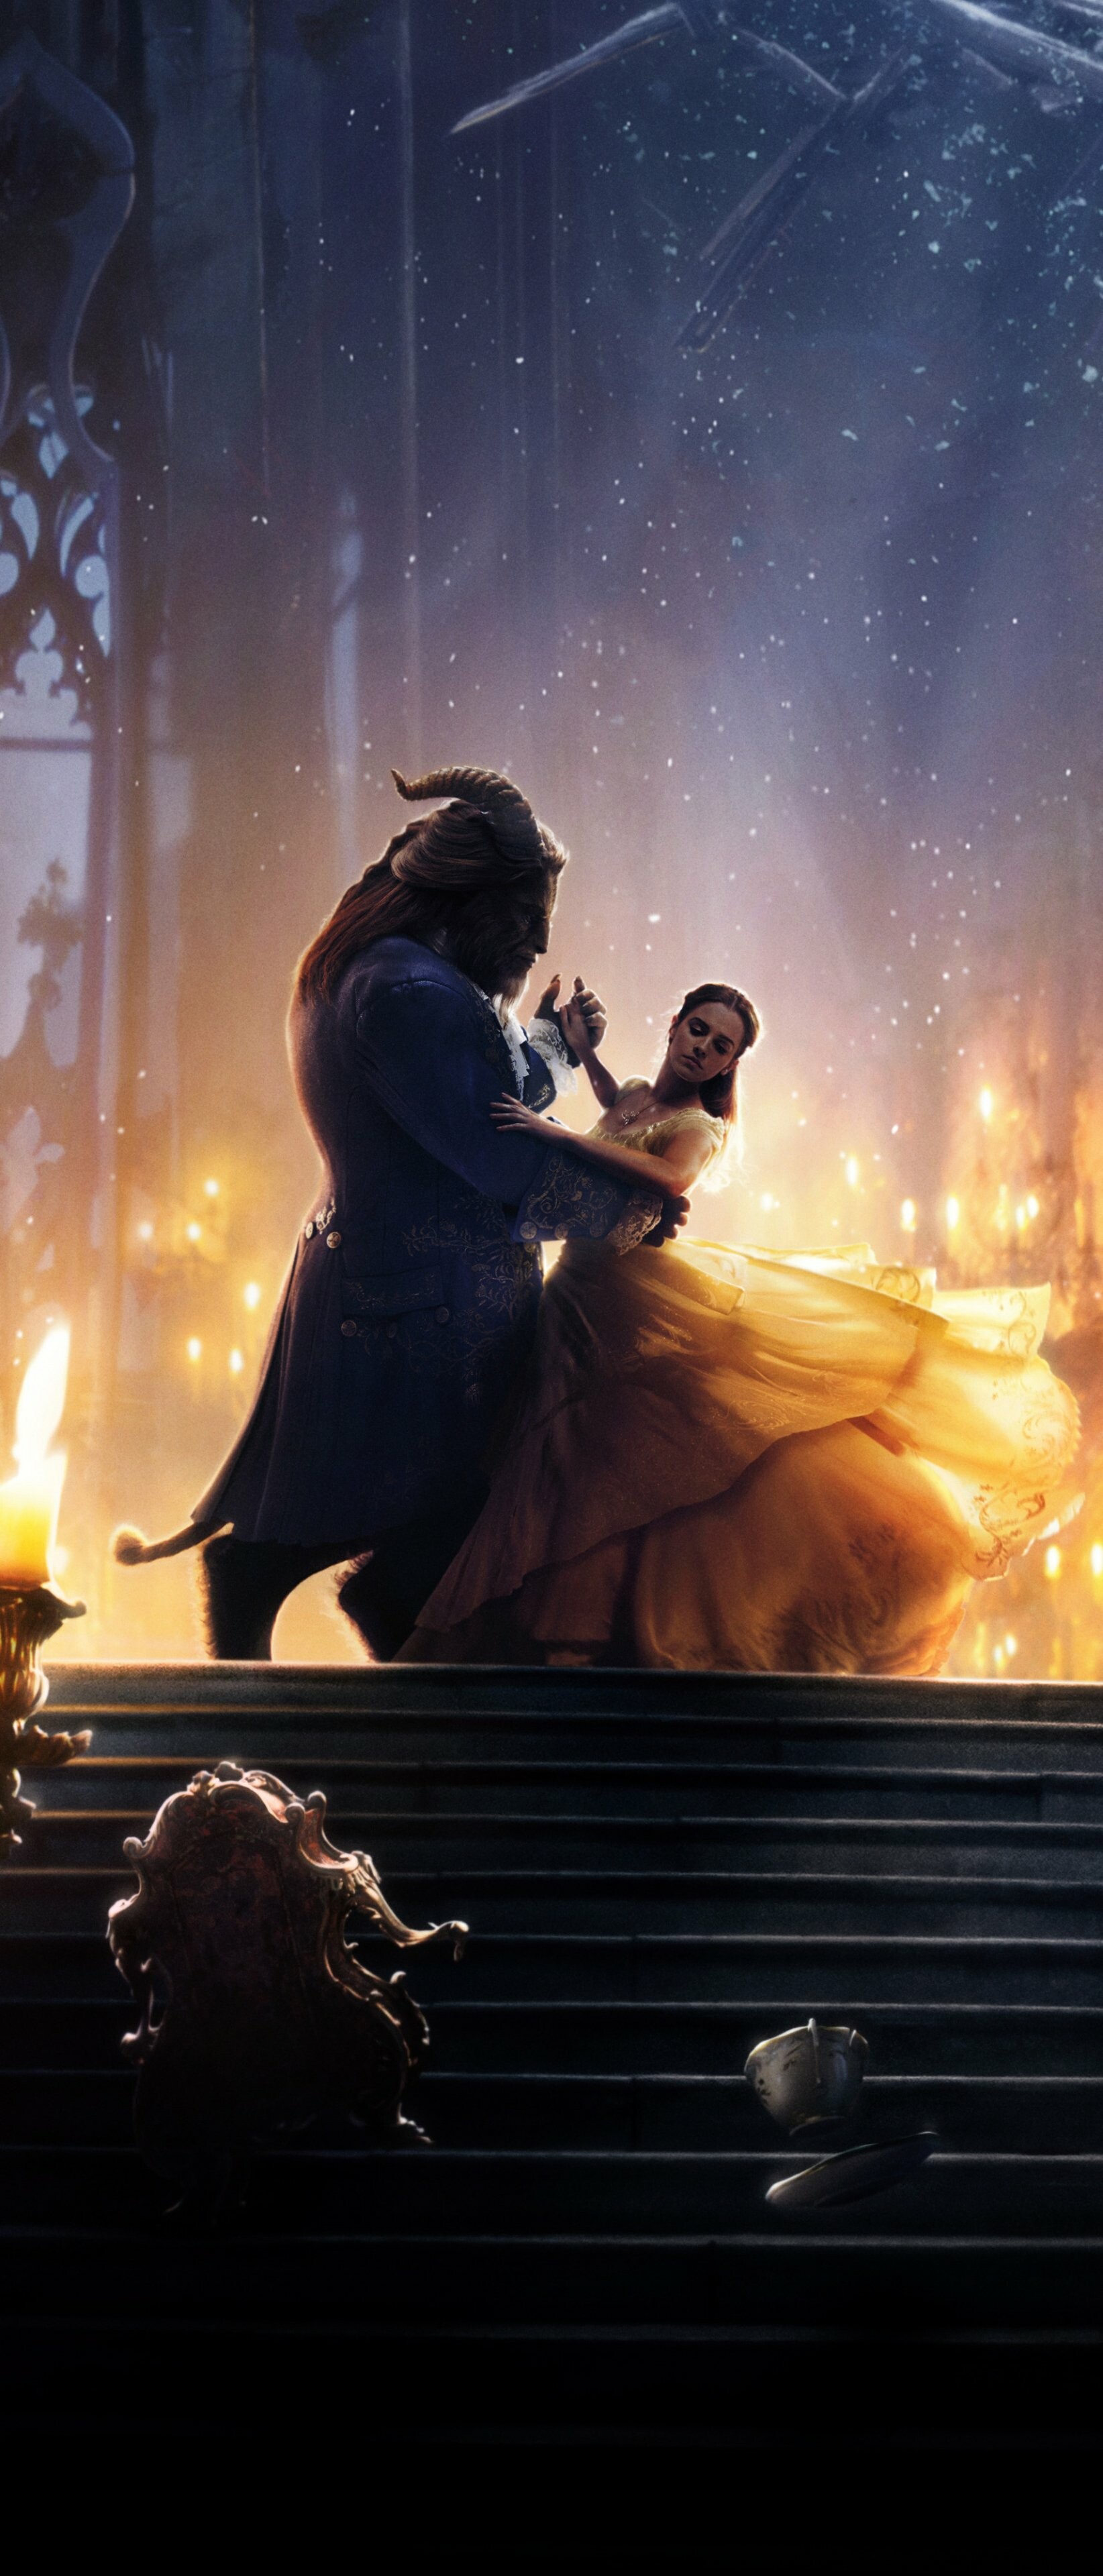 Beauty and the Beast: A live action adaptation of Disney's 1991 animated film of the same name. 1650x3840 HD Background.